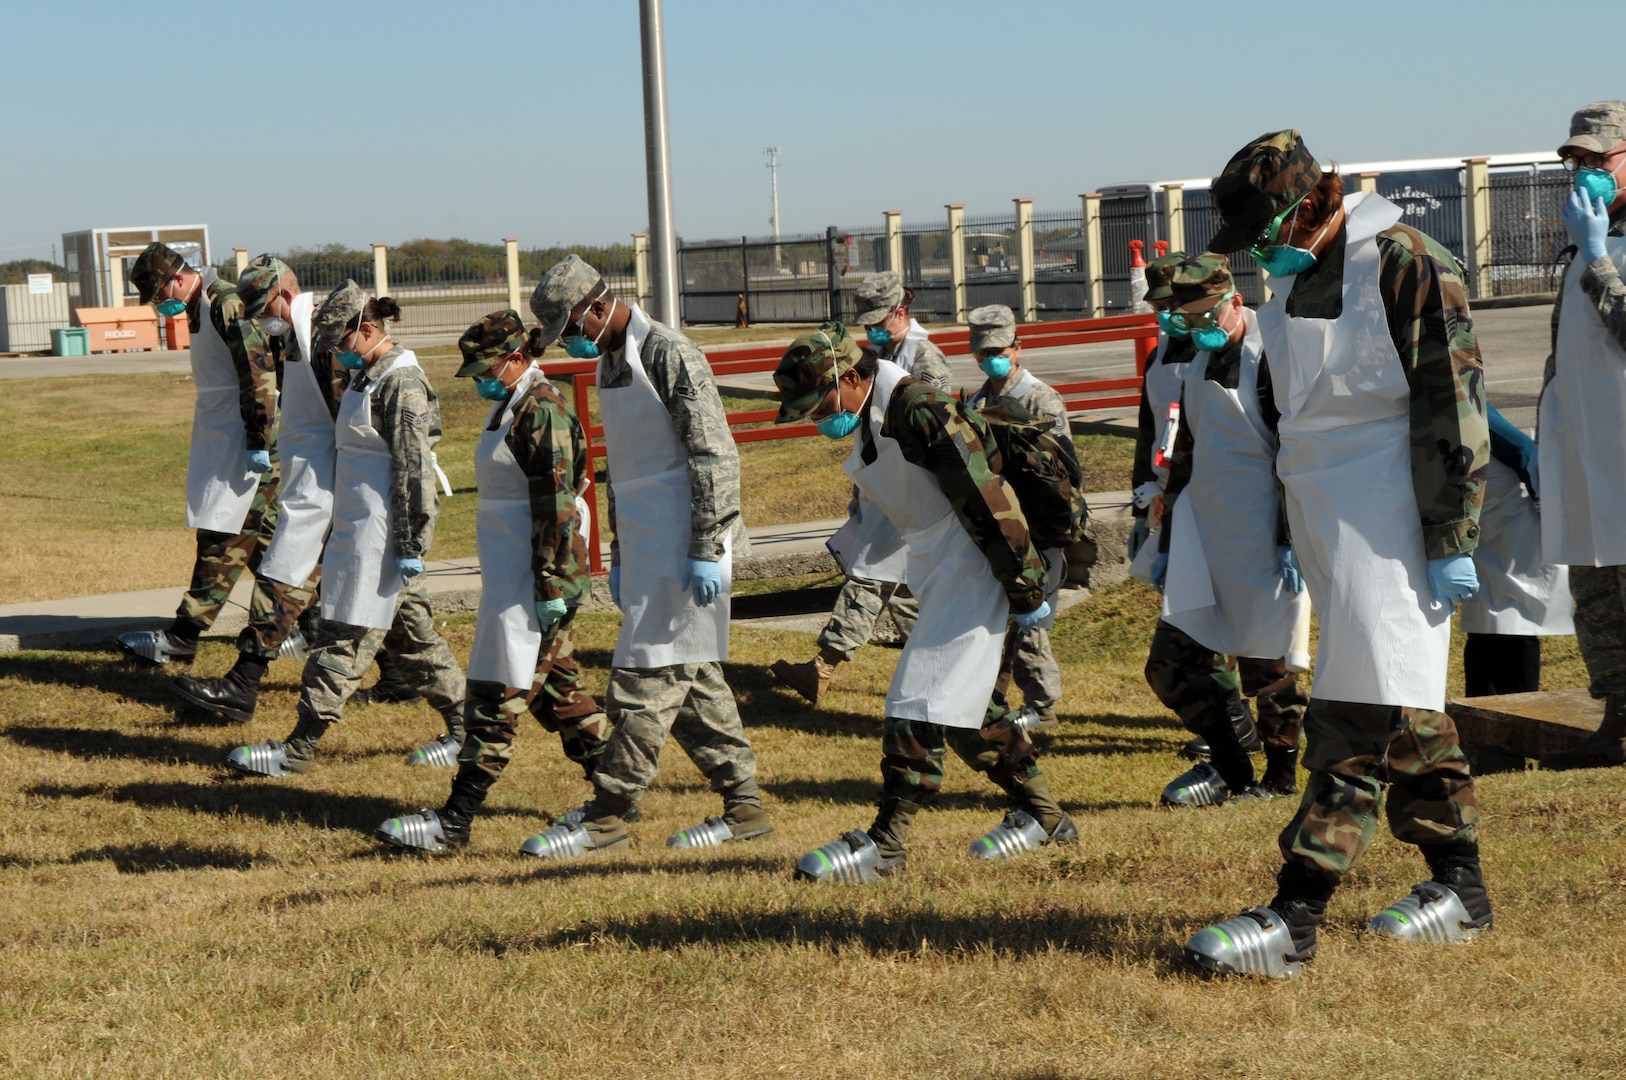 Members of the search and recovery team scoured the grounds of a simulated F-22 crash site for human remains during the exercise portion of the 2008 Operational Readiness Inspection at Randolph Air Force Base, Texas. (U.S. Air Force photo by Joel Martinez)